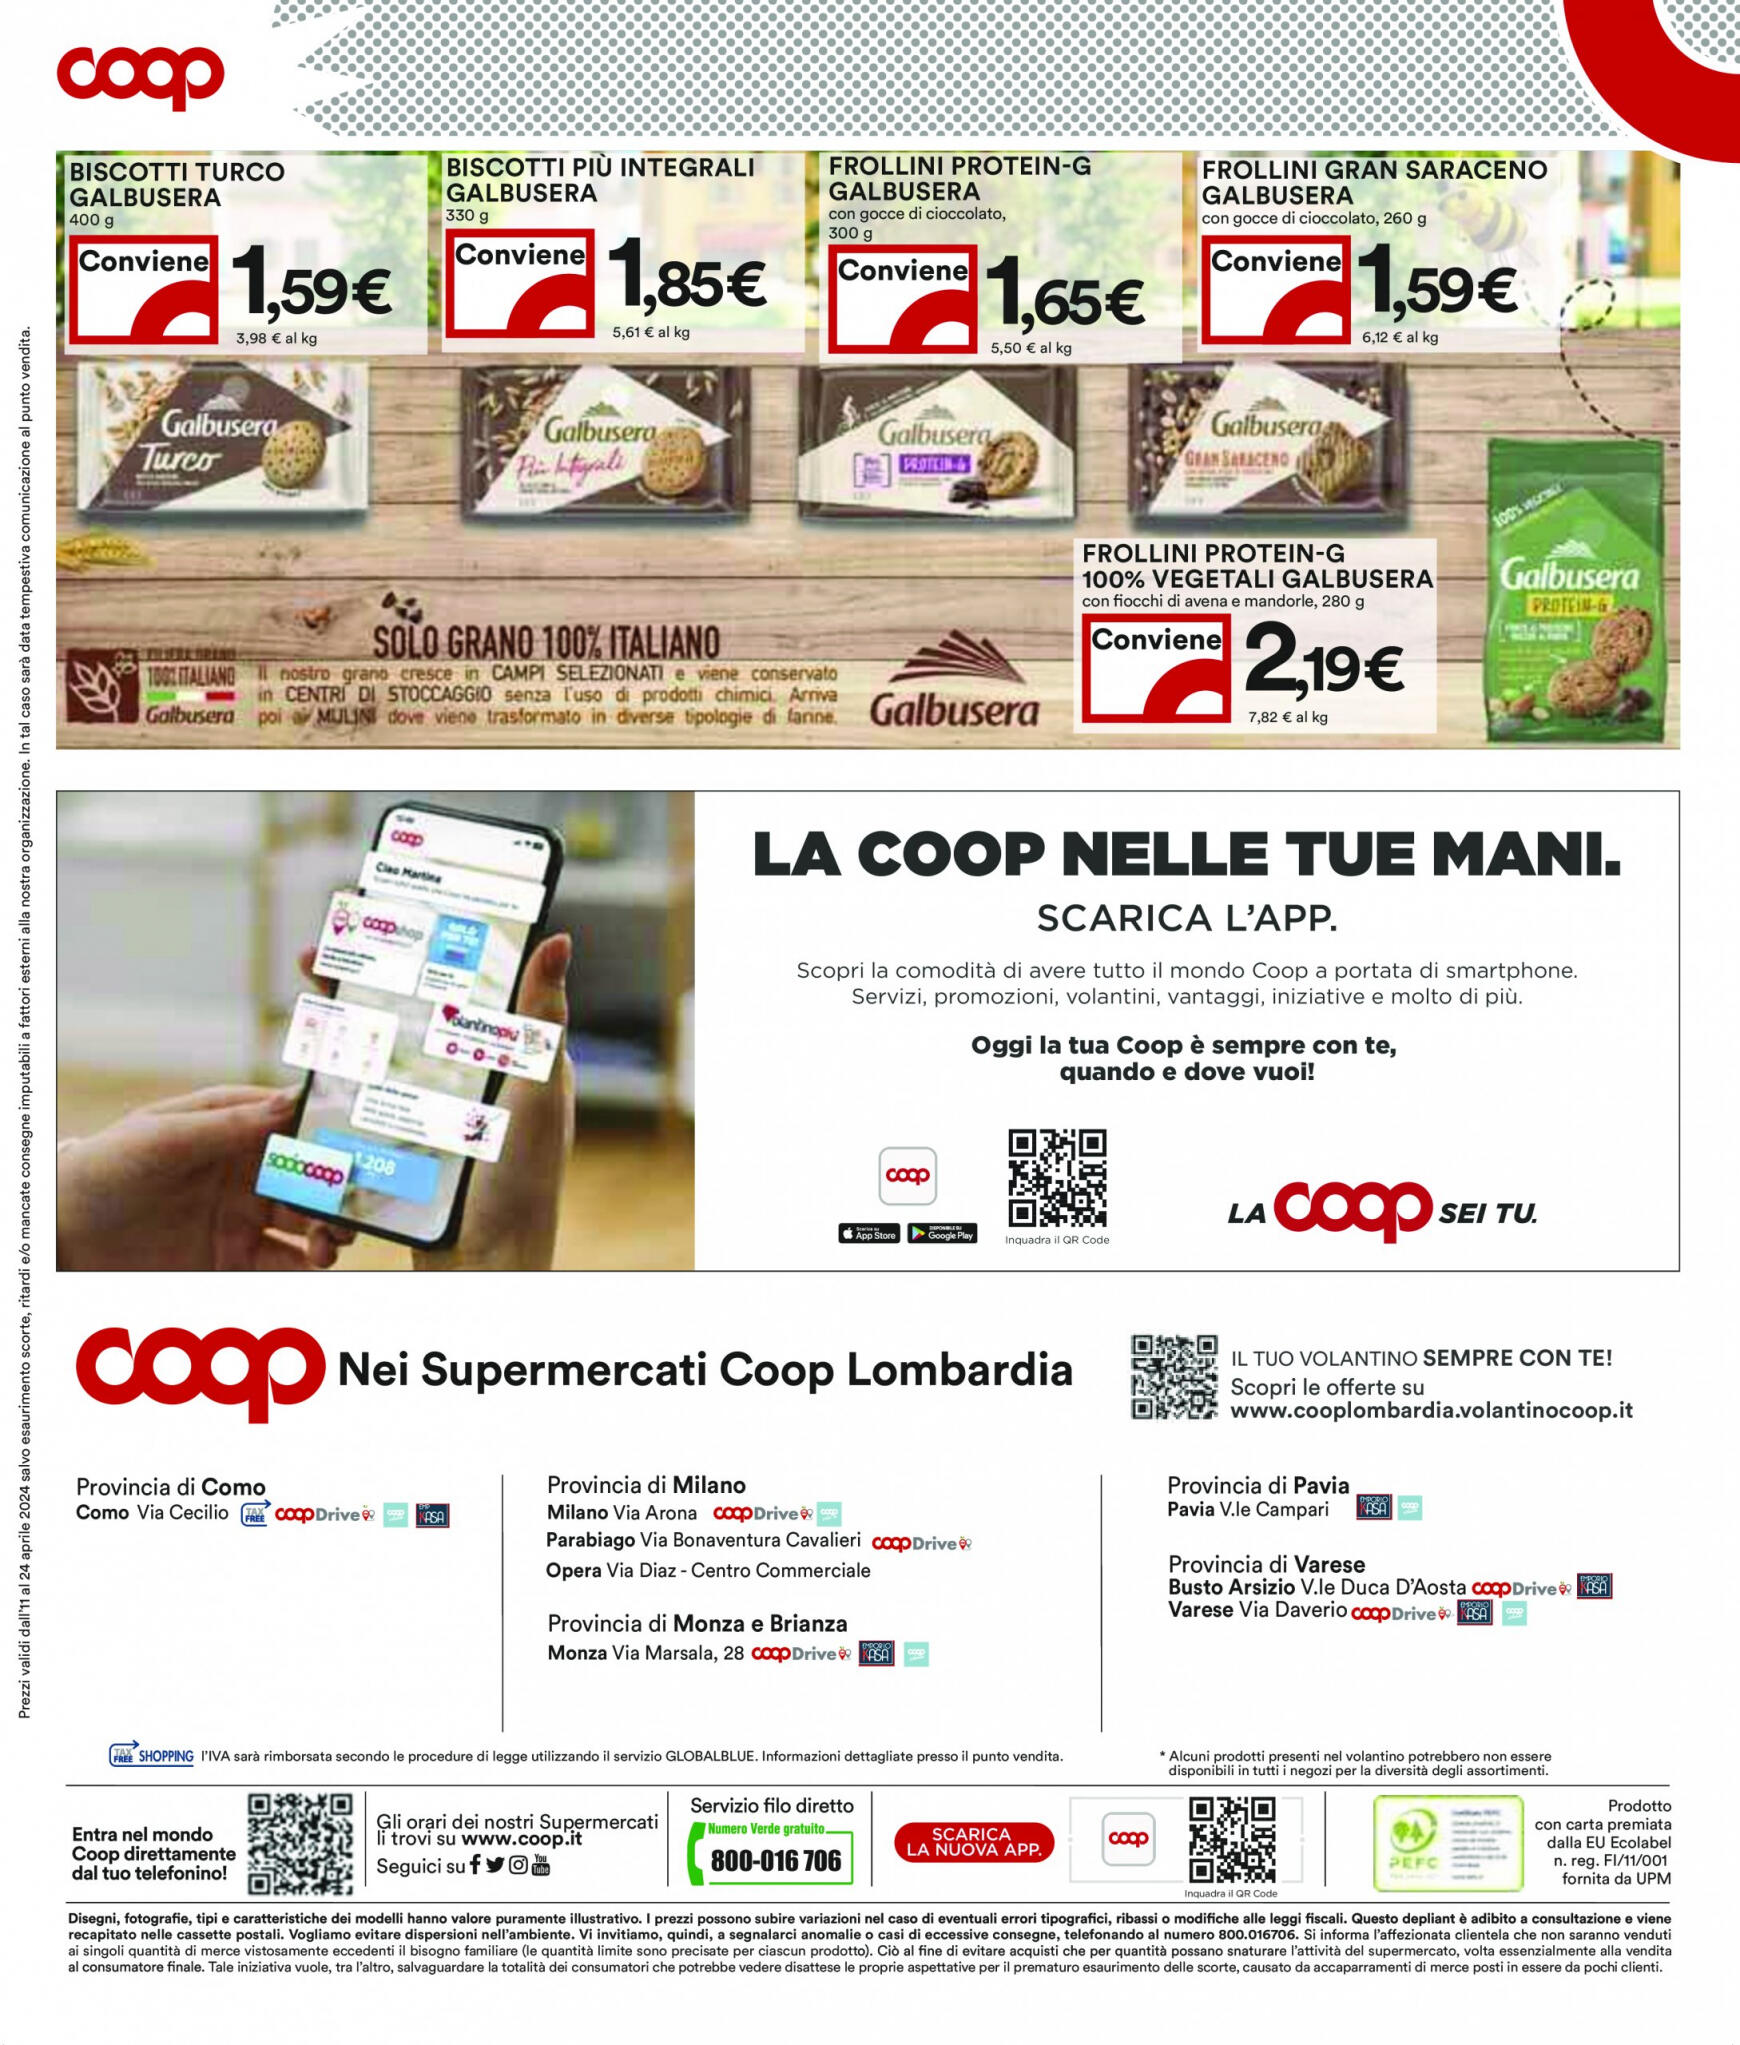 coop - Nuovo volantino Coop 11.04. - 24.04. - page: 25